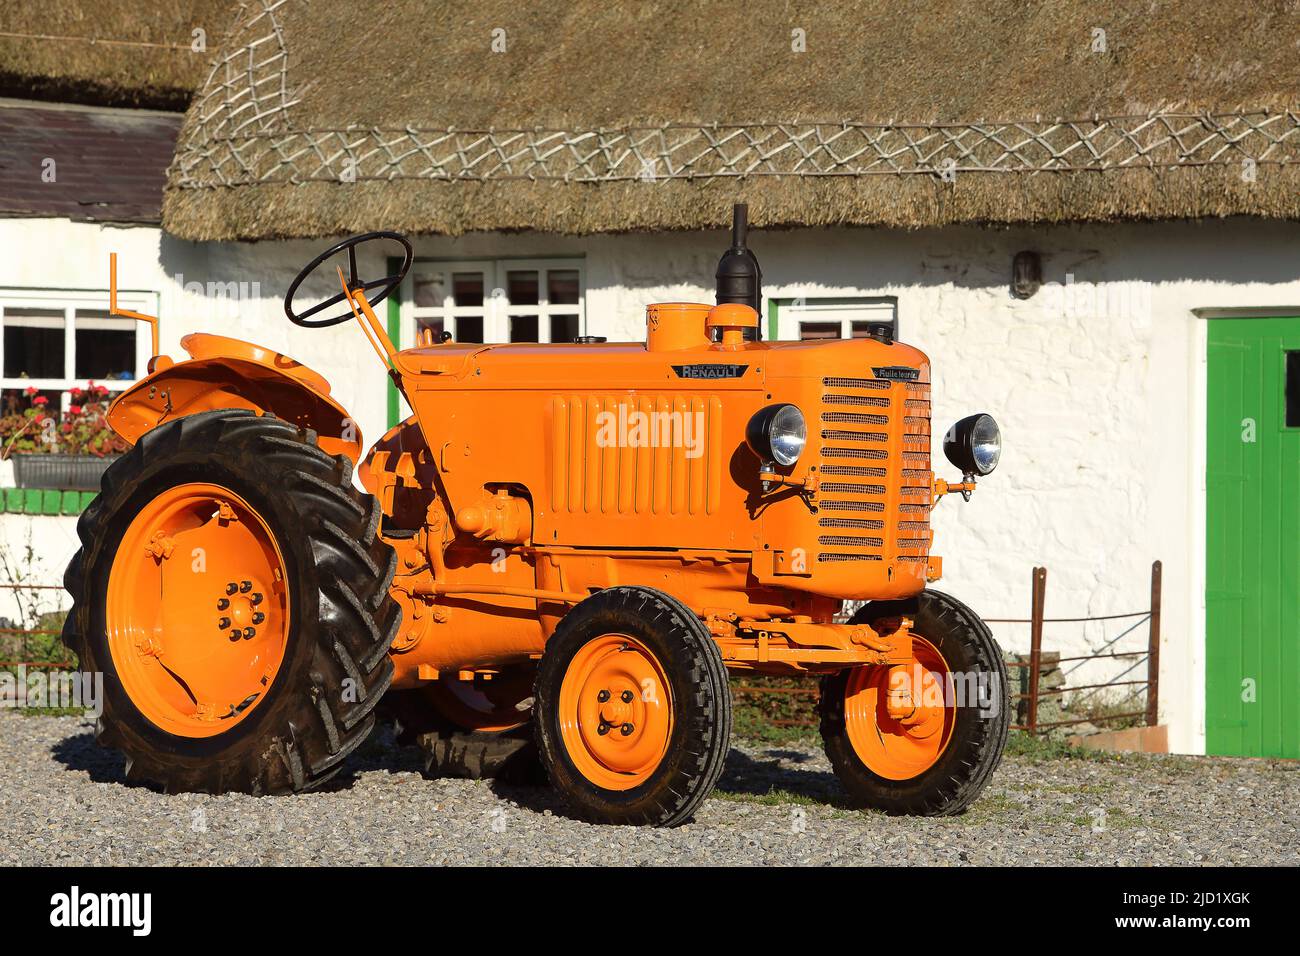 1950 Renault R7012 tractor Stock Photo